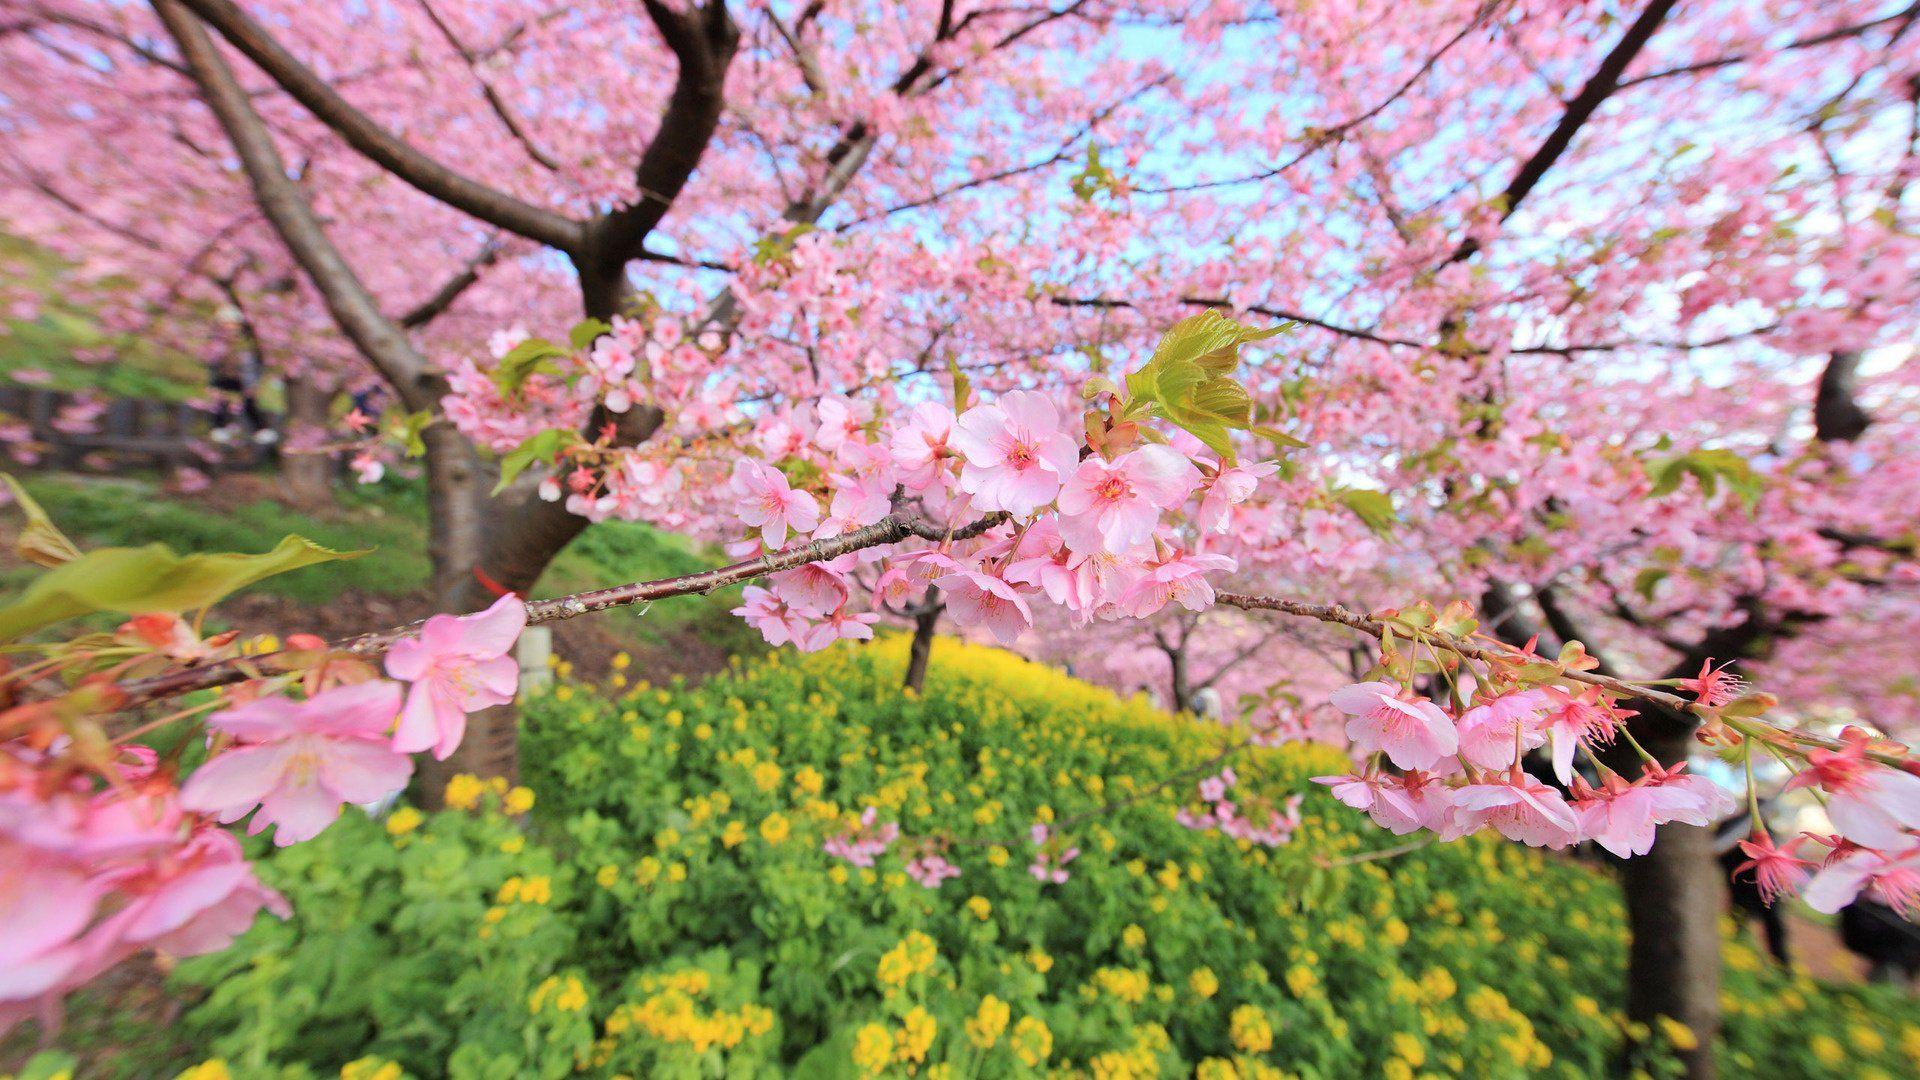 Flower Trees Wallpapers - Top Free Flower Trees Backgrounds ...